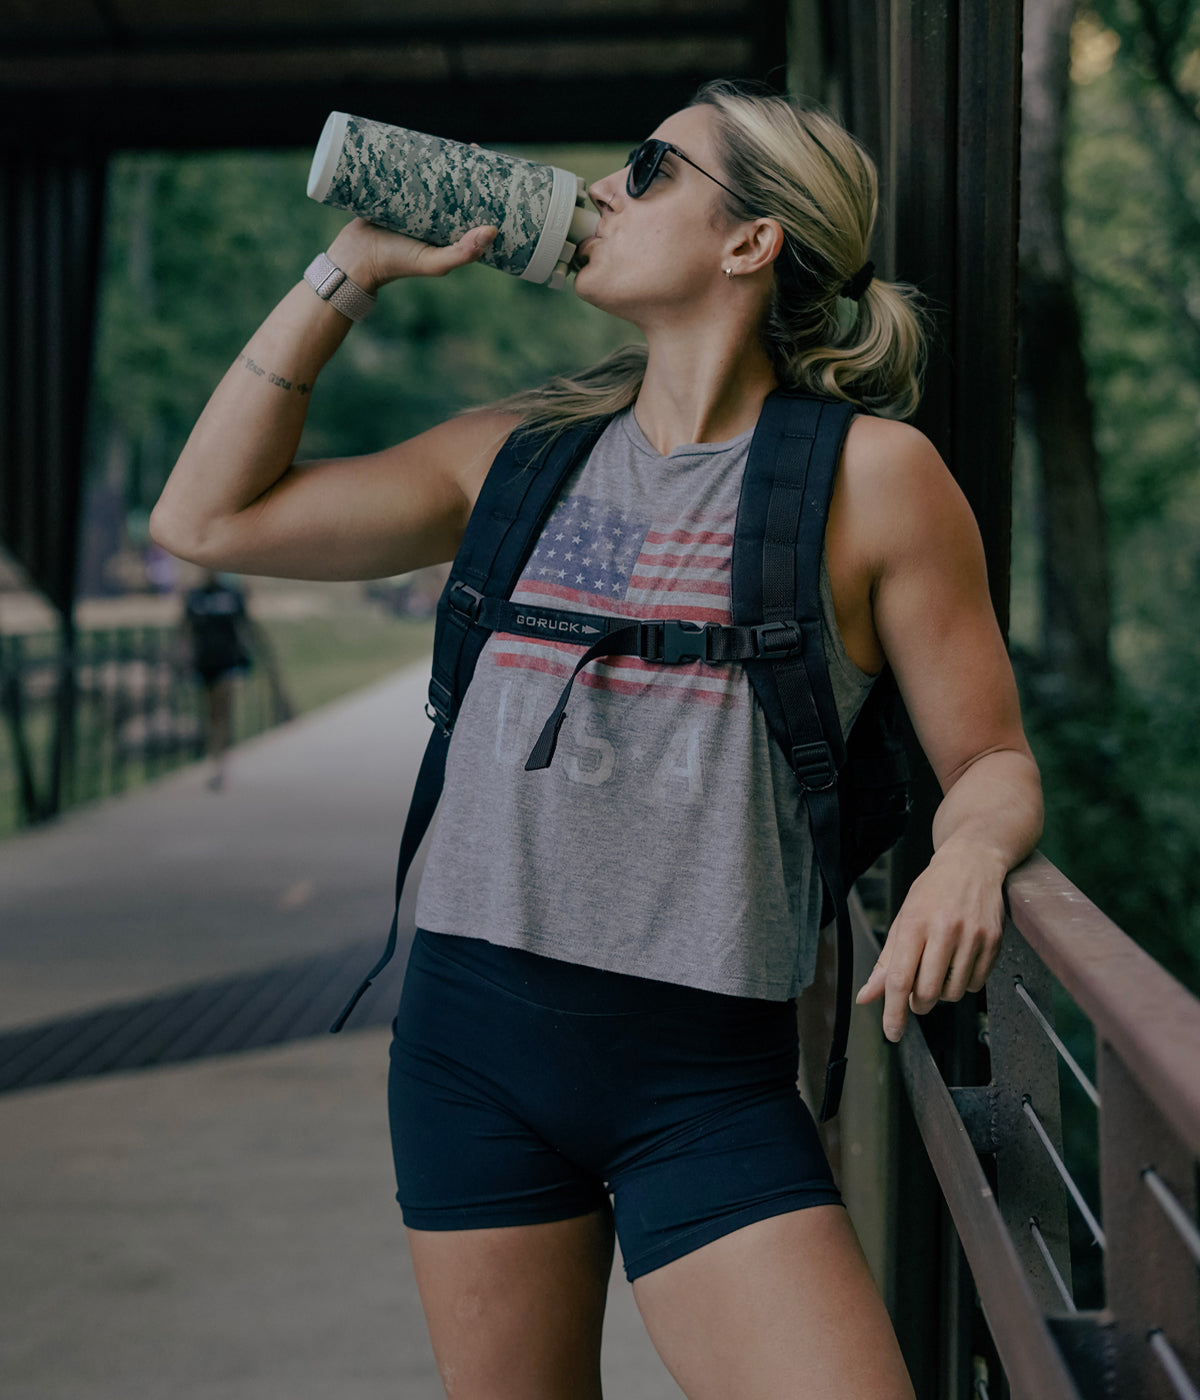 This image shows a young, fit Caucasian woman taking a rest along a concrete walking path. She is taking a refreshing drink from the US Army Camo 26oz Ice Shaker.